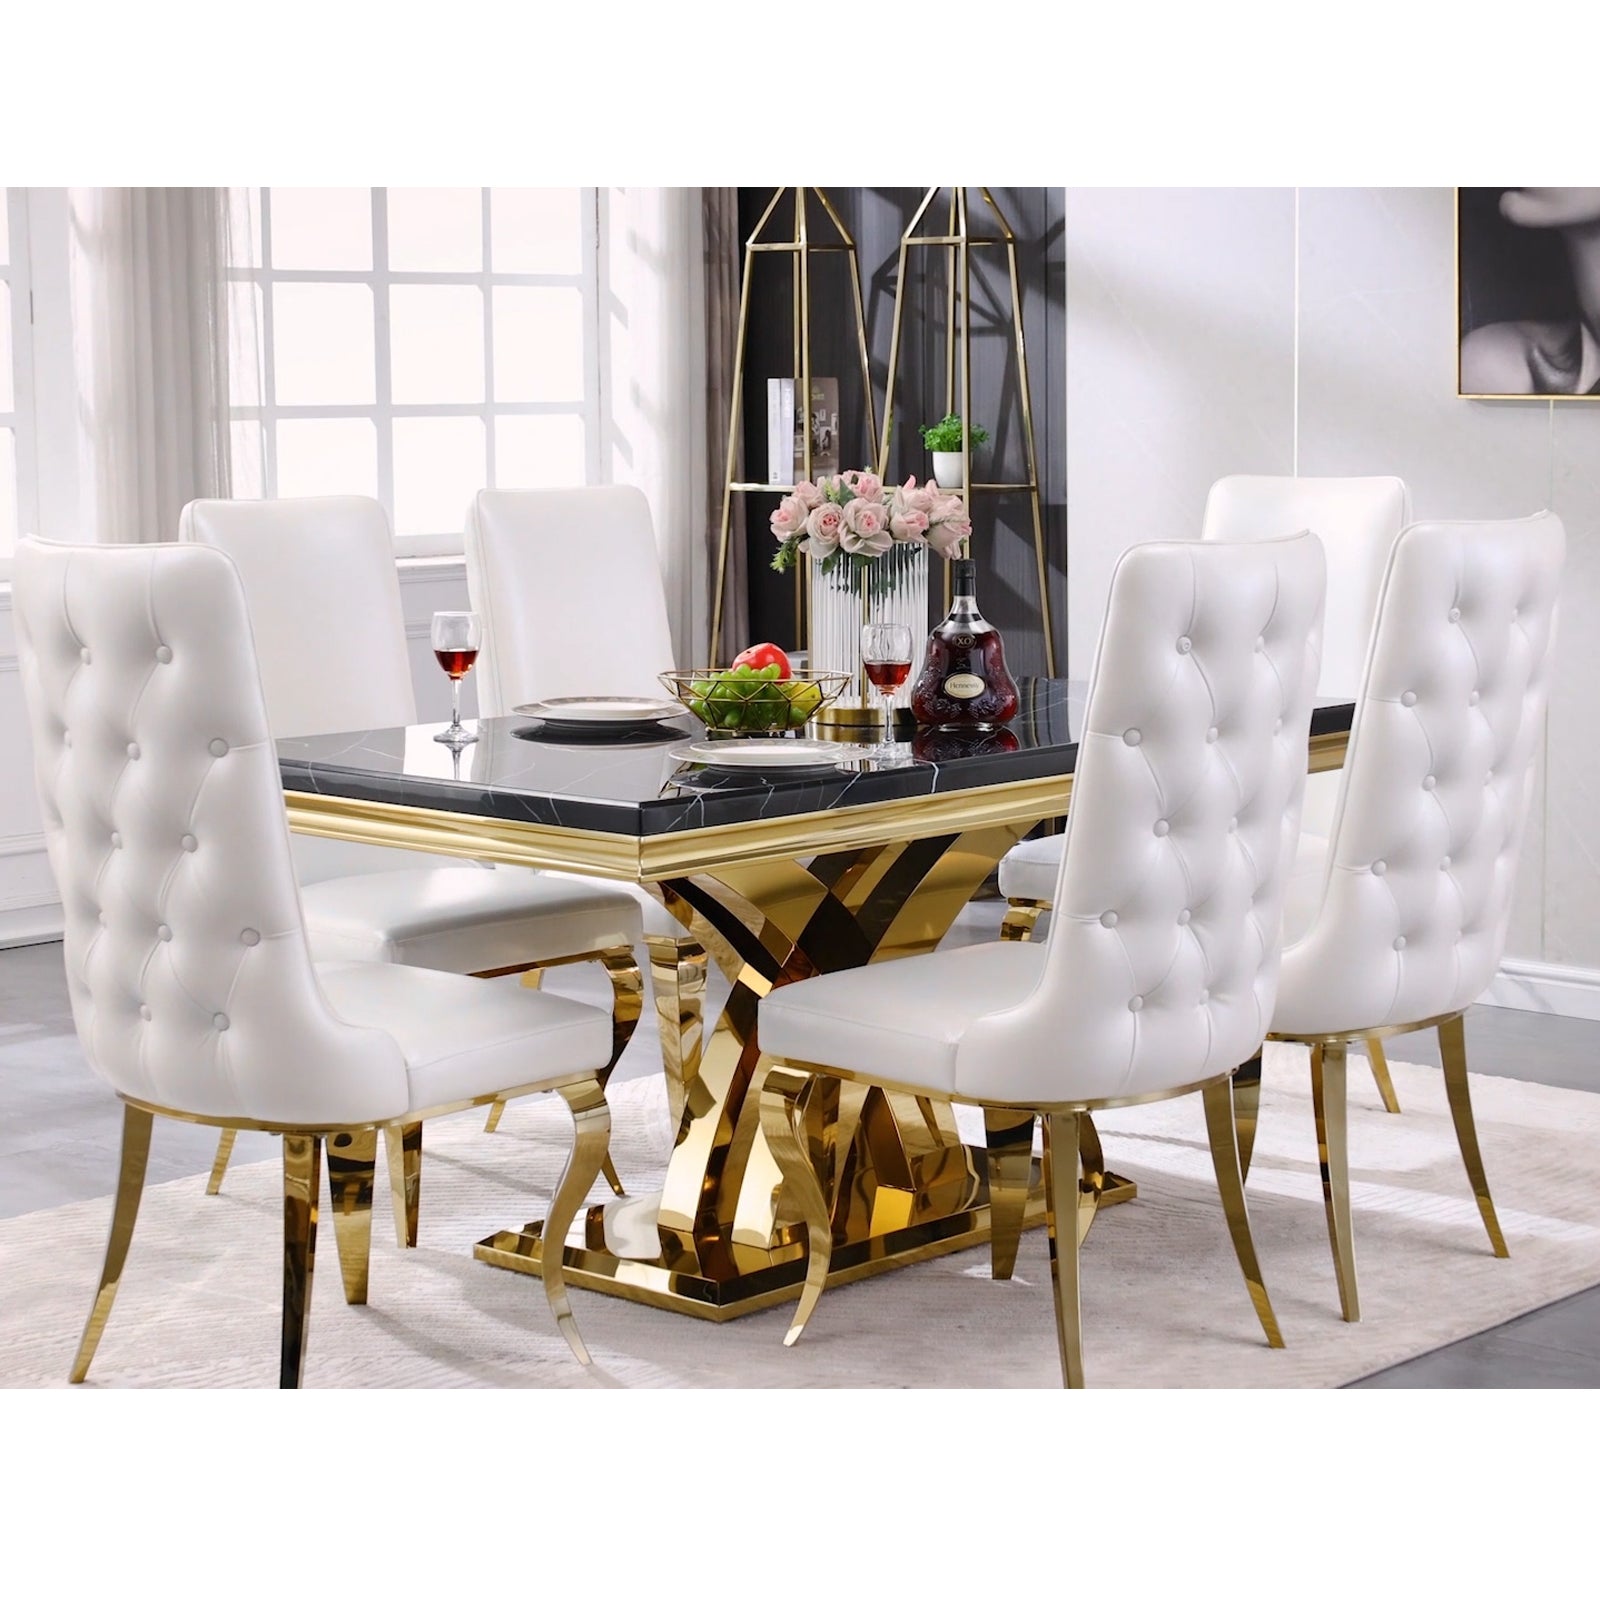 637-Set | AUZ White and Gold Dining room Sets for 6